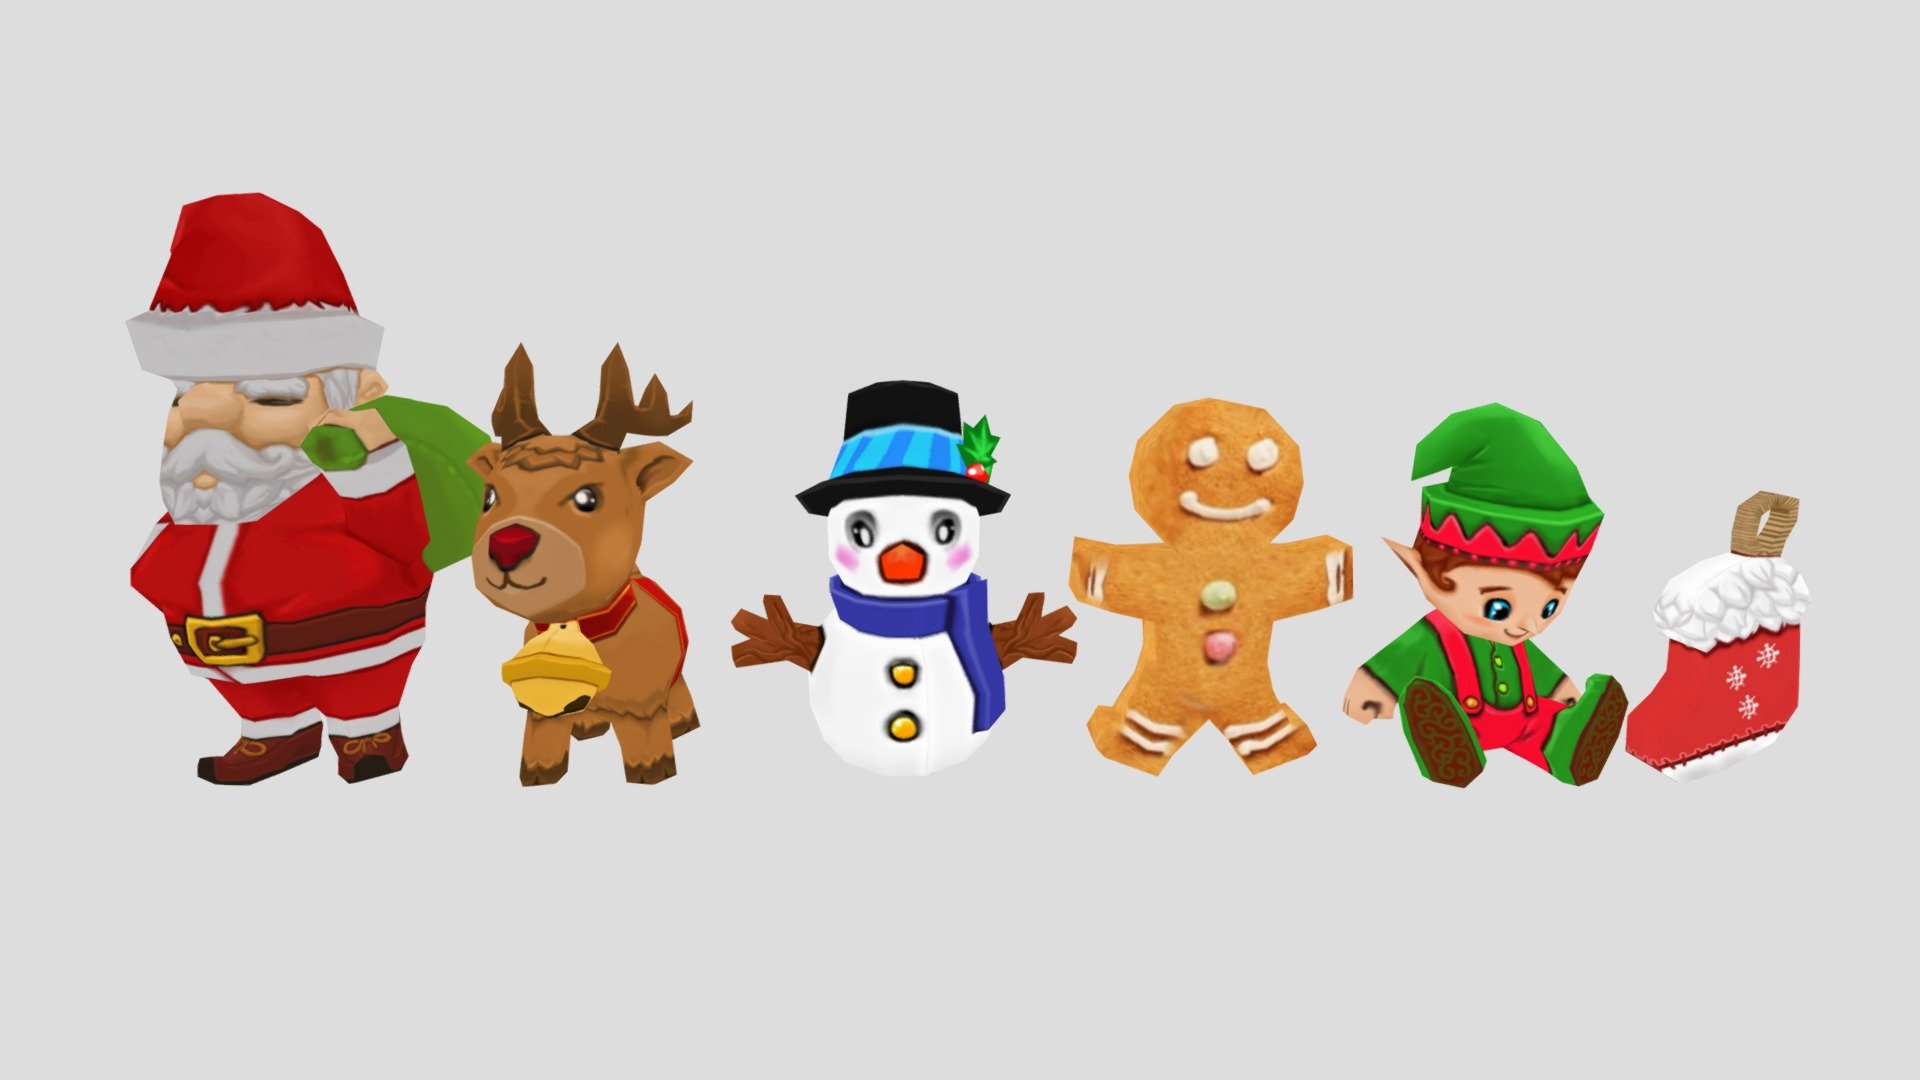 This is a 3D Christmas pack. It's low poly model which is made in Zbrush, and its texture is hand painted.
The models are include : Santo, Reindeero, Snowmano, Gingerbreado, Elfo, and Socks.

These model can be used for any type of work as: low poly projects, videogames, image rendering, video compositing, 3D websites, animation, movies. This is perfect for using it as decoration in a Christmas Scene or for a Christmas postcard image with other Christmas decorations. These are contains a .obj and all the textures.

I hope you like it! if you have any doubts or any questions just let me know. If you like it I will appreciate it if you could give your personal review! Thanks - 3D Christmas pack - 3D model by Erwin Pramana (@erwinprama) 3d model